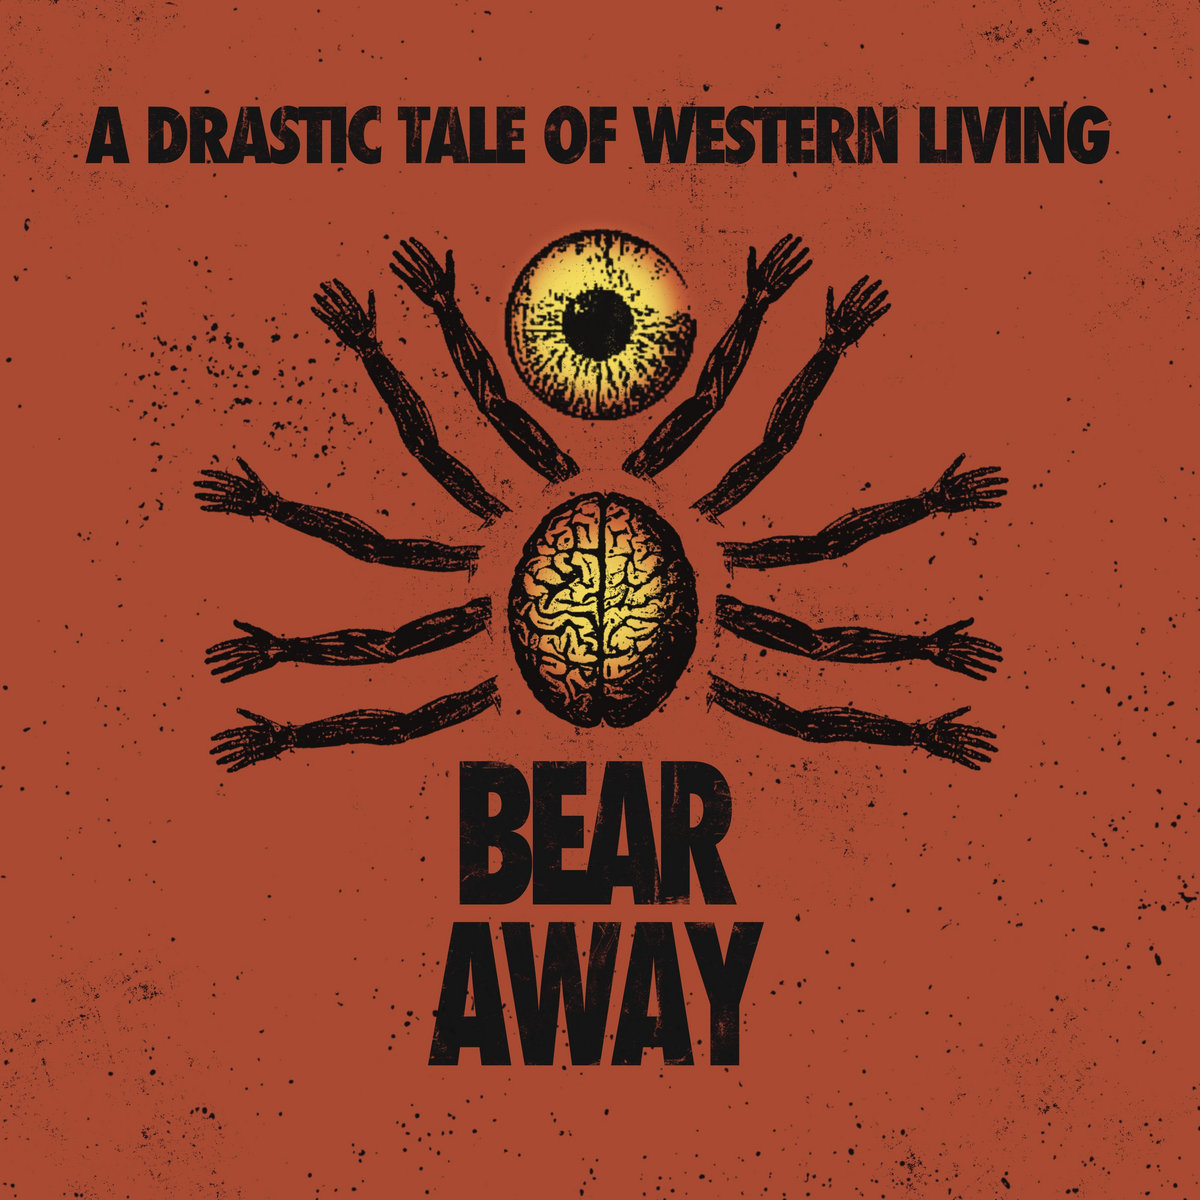 Bear Away – A Drastic Tale Of Western Living col.LP (Shield) Bear Away are a melodic punk band based in Scarborough, North Yorkshire. Having released their debut E.P in 2019, they have since played across the UK and released two 7 inch singles, including a split with Finnish punks Custody. Their debut album "A Drastic Tale of Western Living" is to be released 21st October via Brassneck Records (UK), Engineer Records (UK), Sell The Heart Records (USA), Shield Recordings (EU), and Waterslide Records (Japan). The band has spent the last 18 months working on the album with Dan Tinkler taking on mixing duties and Collin Jordan at the Boiler Room looking after the mastering